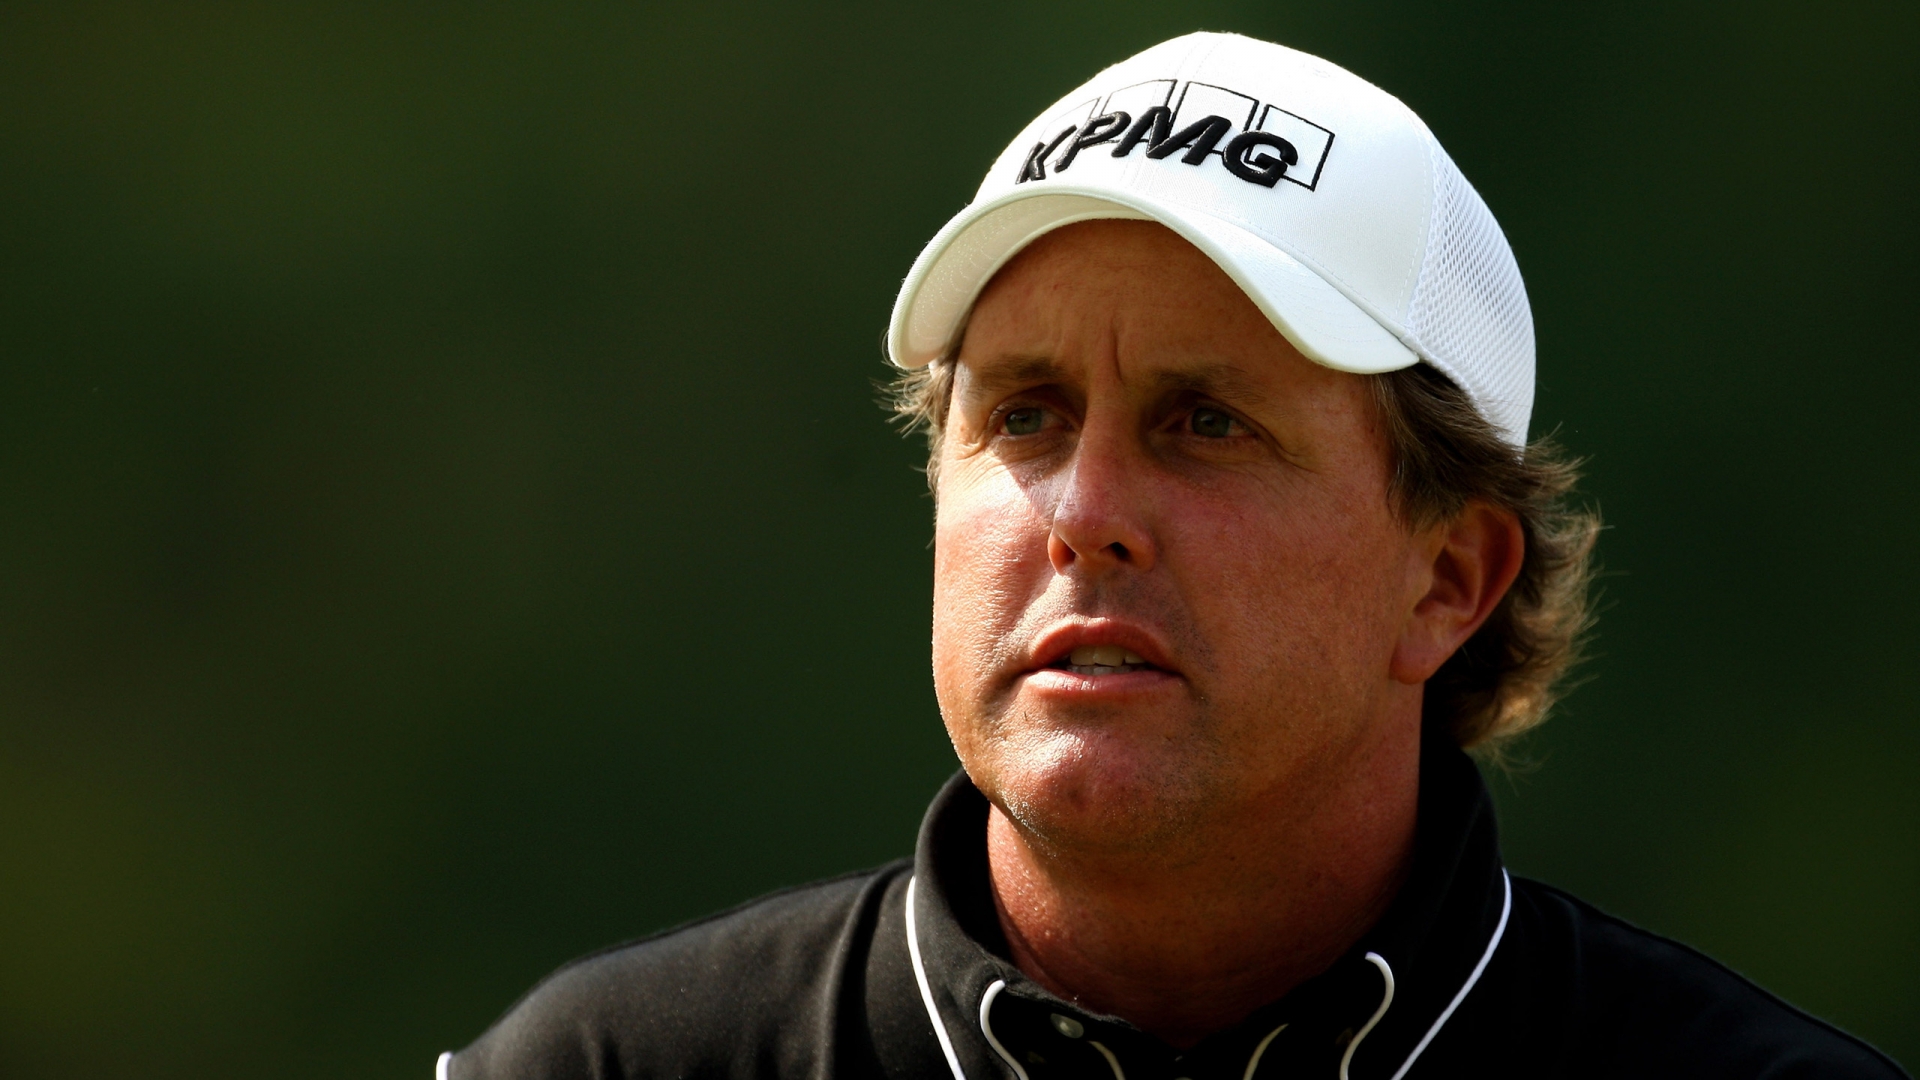 Philip Mickelson for 1920 x 1080 HDTV 1080p resolution